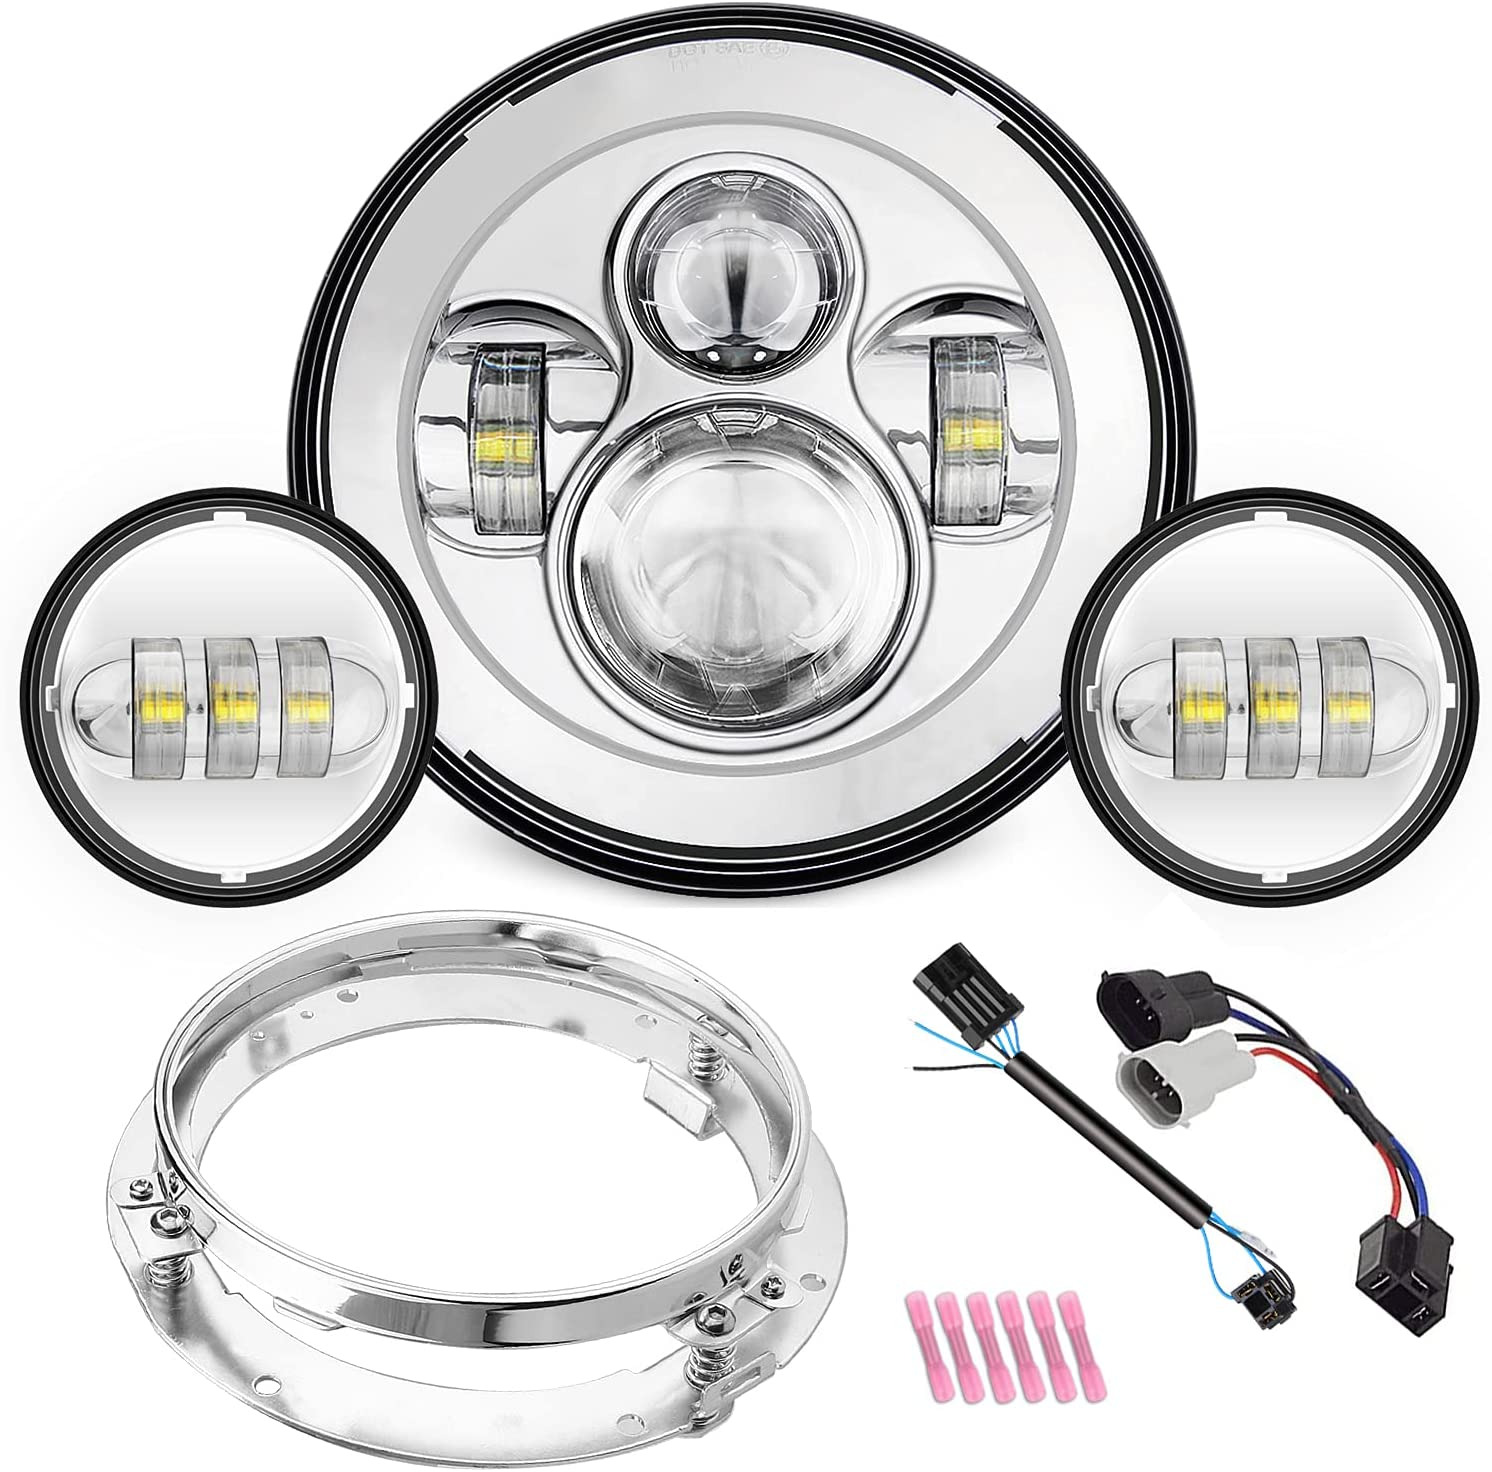 Motorcycle 7 Inch LED Headlight Chrome Compatible with H_Arley Road King, Compat